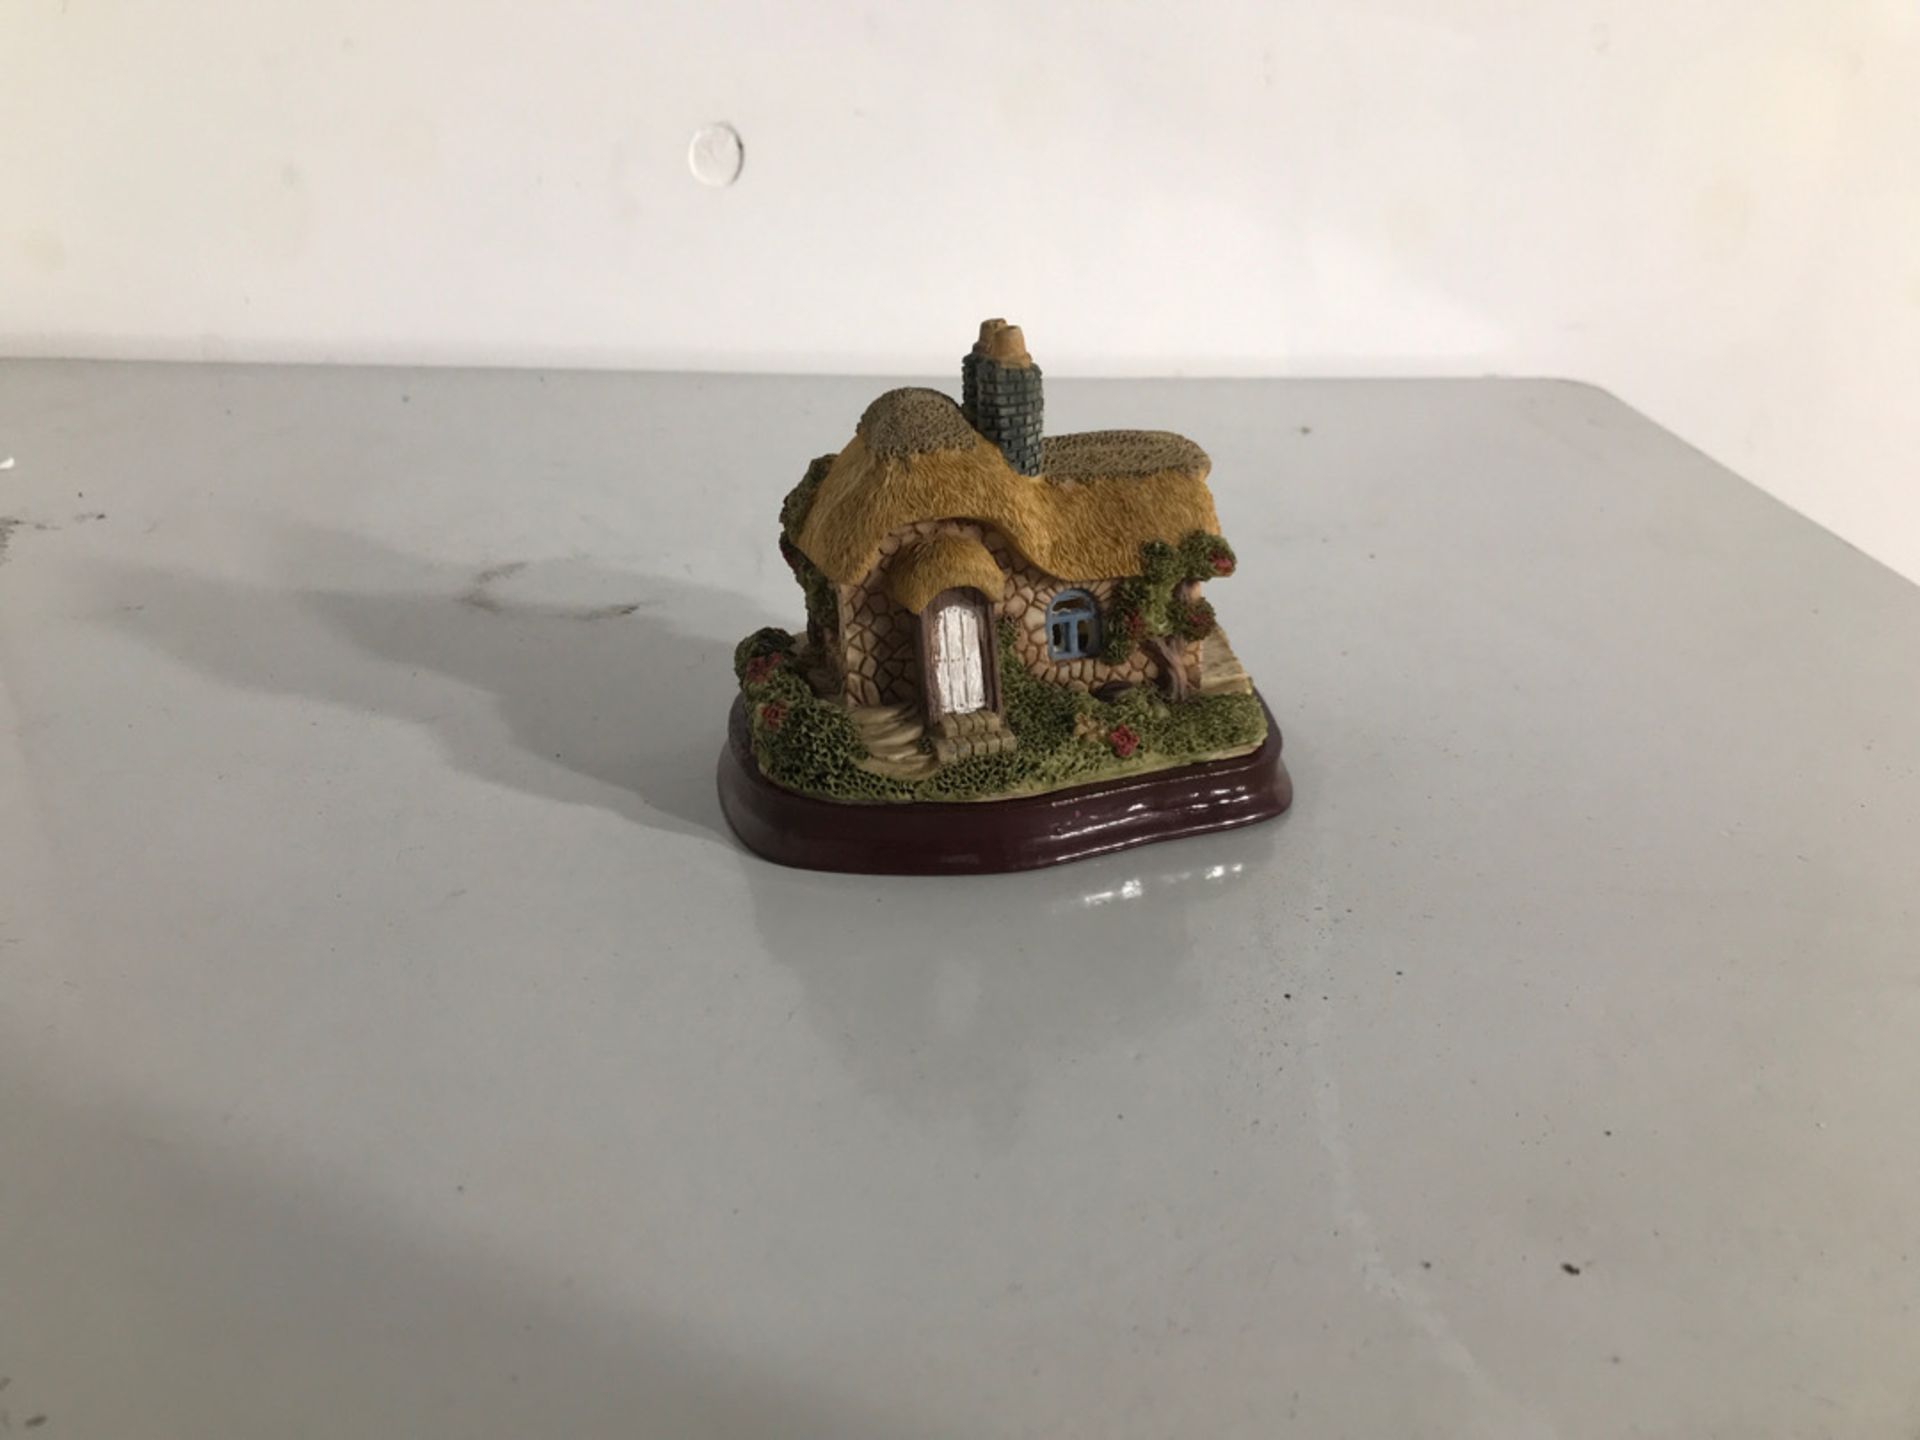 Thatched cottage ornament - Image 2 of 2